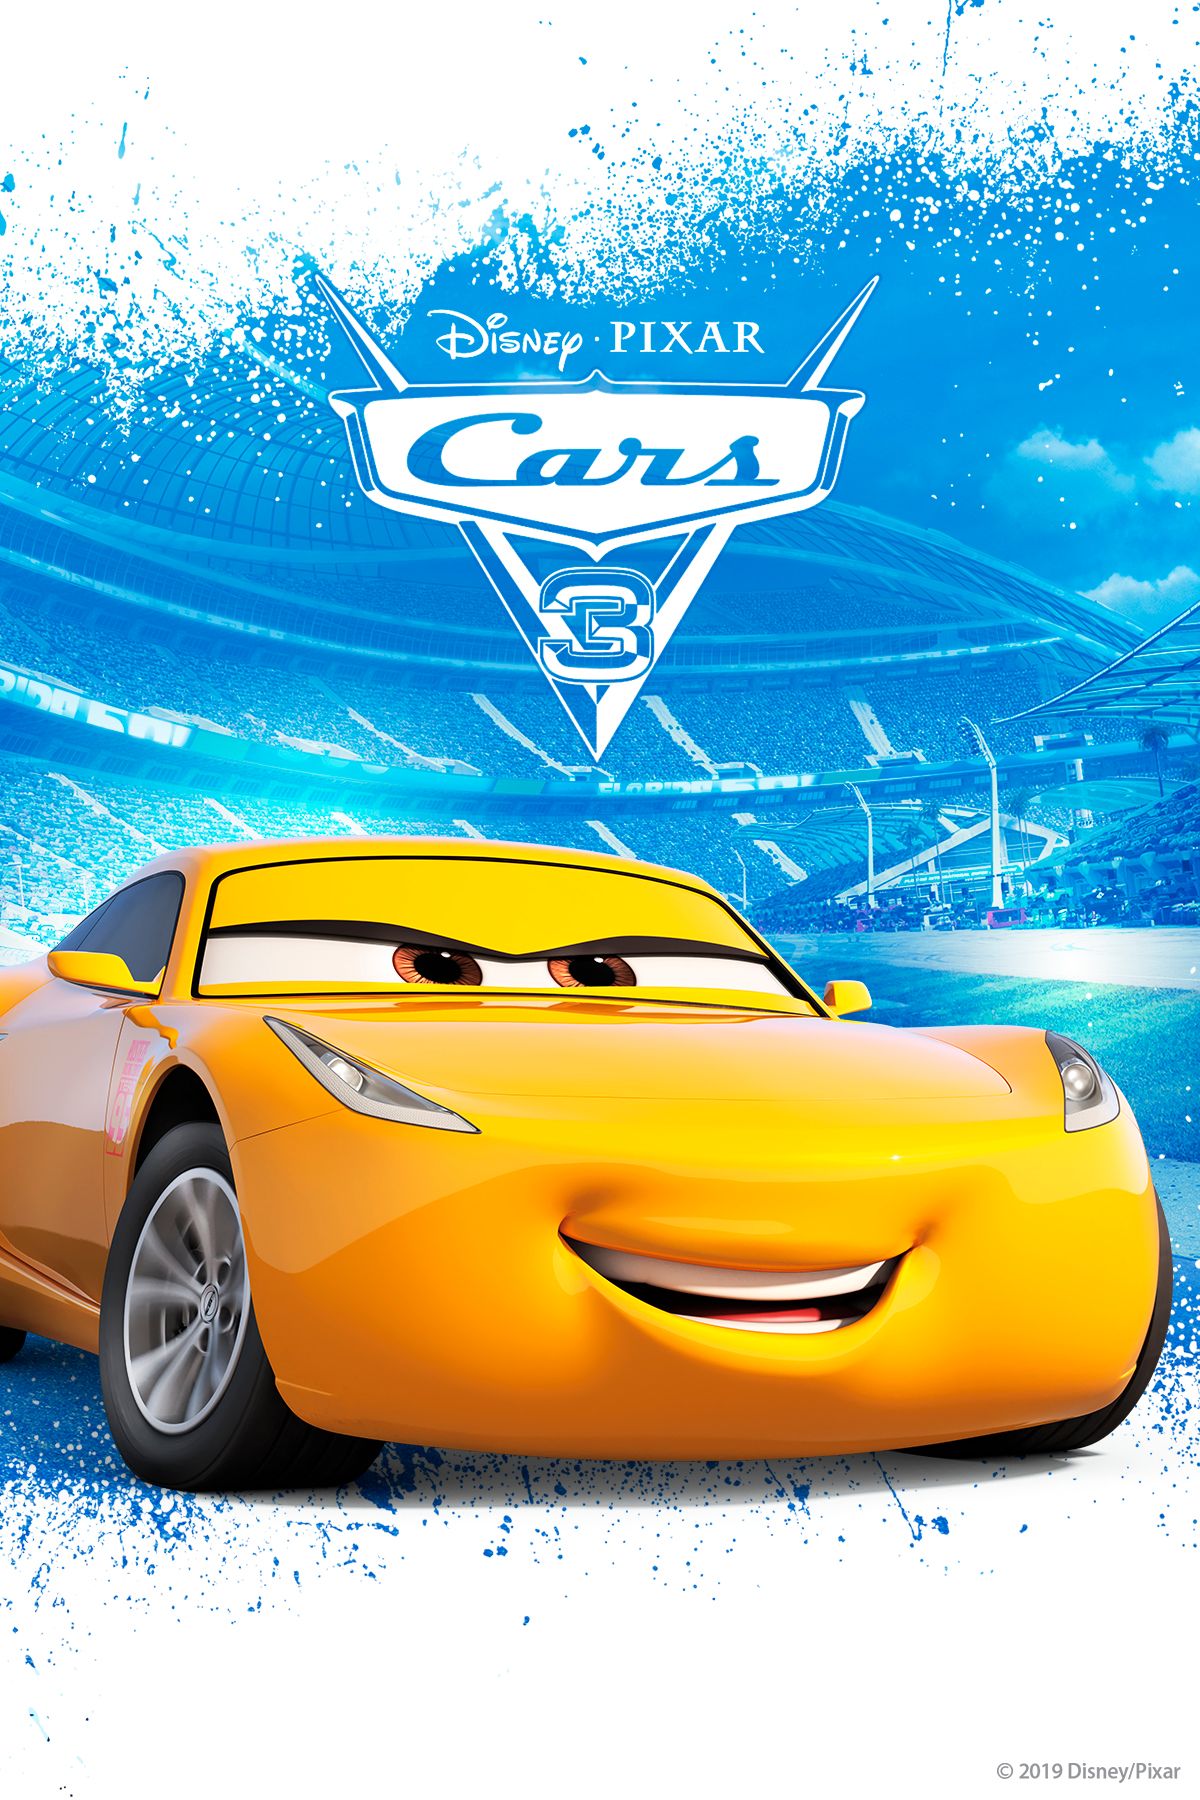 Cars 3 (English) Movie: Review | Release Date (2017) | Songs | Music